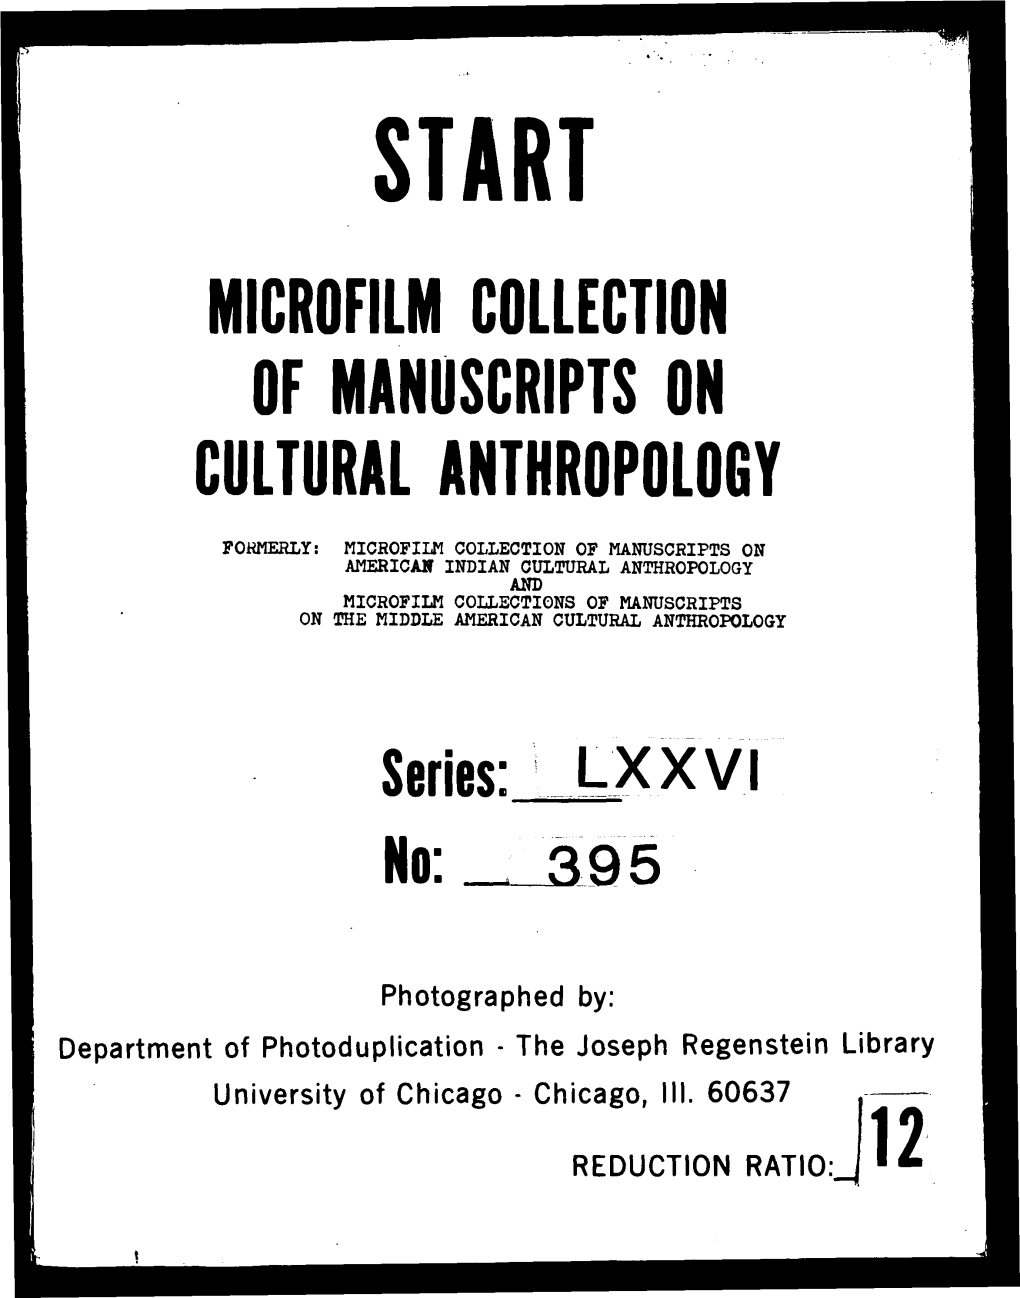 Microfilm Collection of Manuscripts on Cultural Anthr0p0l06y